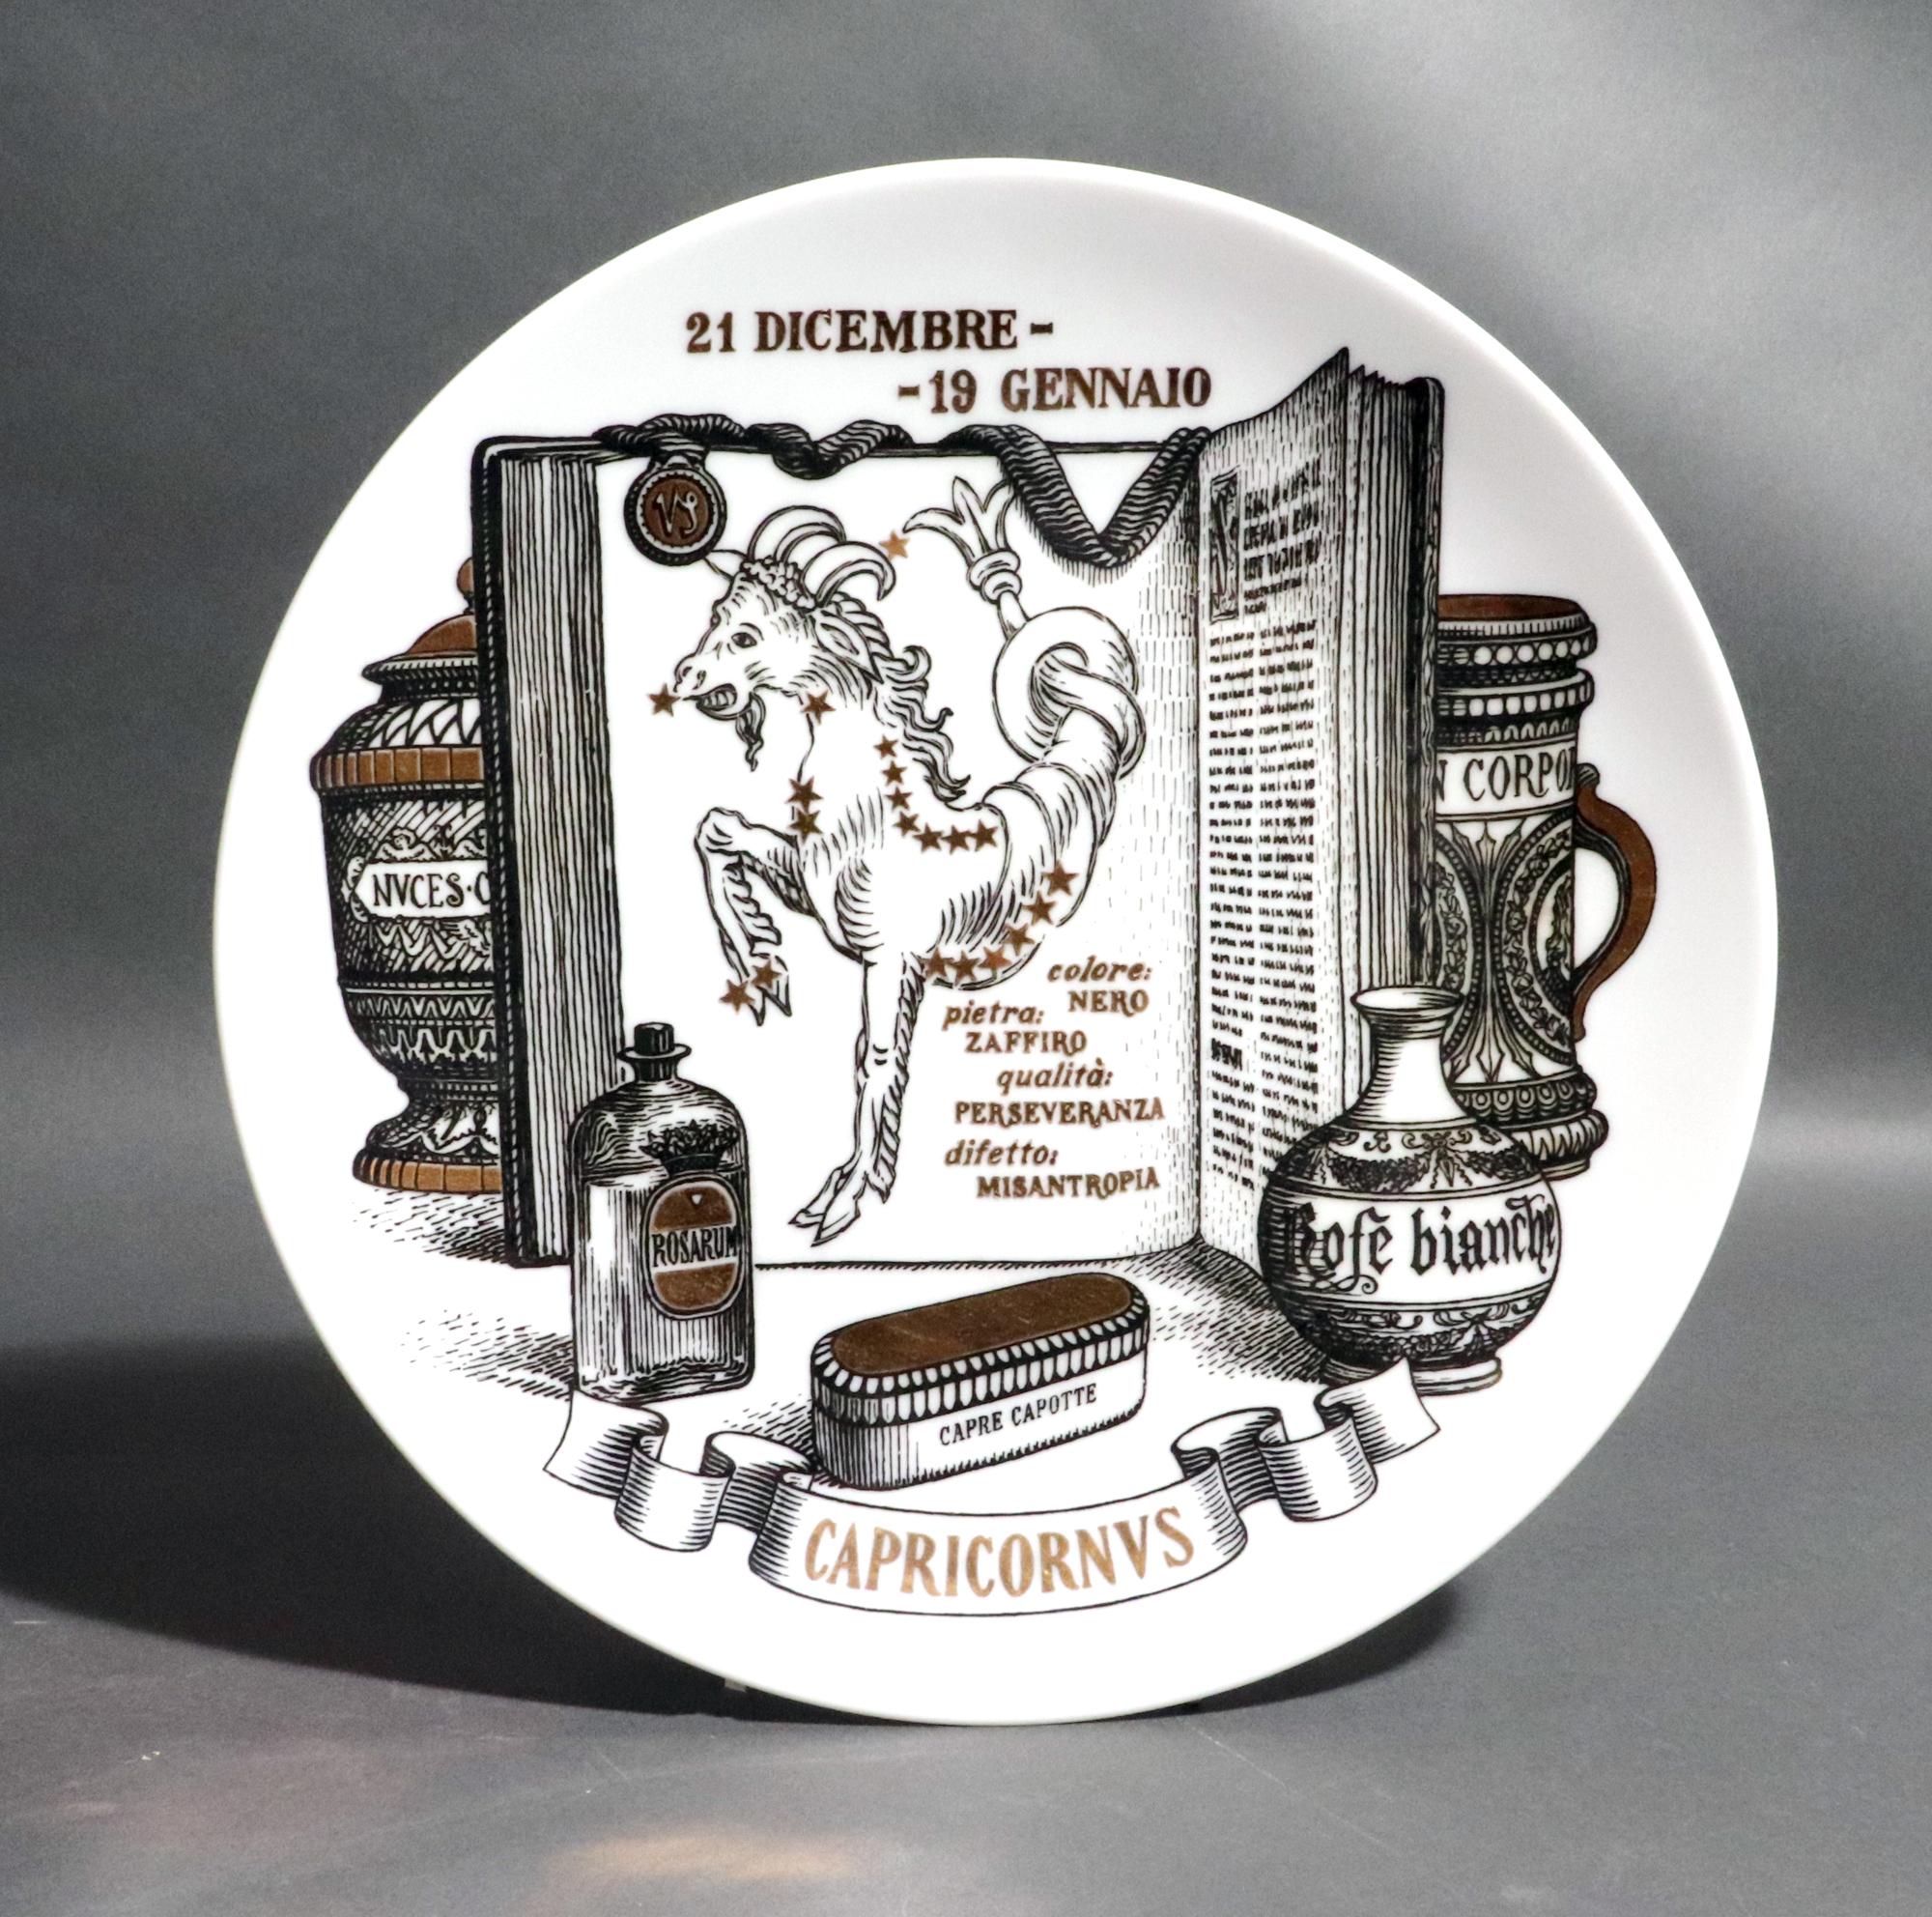 Piero Fornasetti Capricorn Zodiaci Porcelain Plate,
Made for Crinos,
#9 in Series,
Titled 